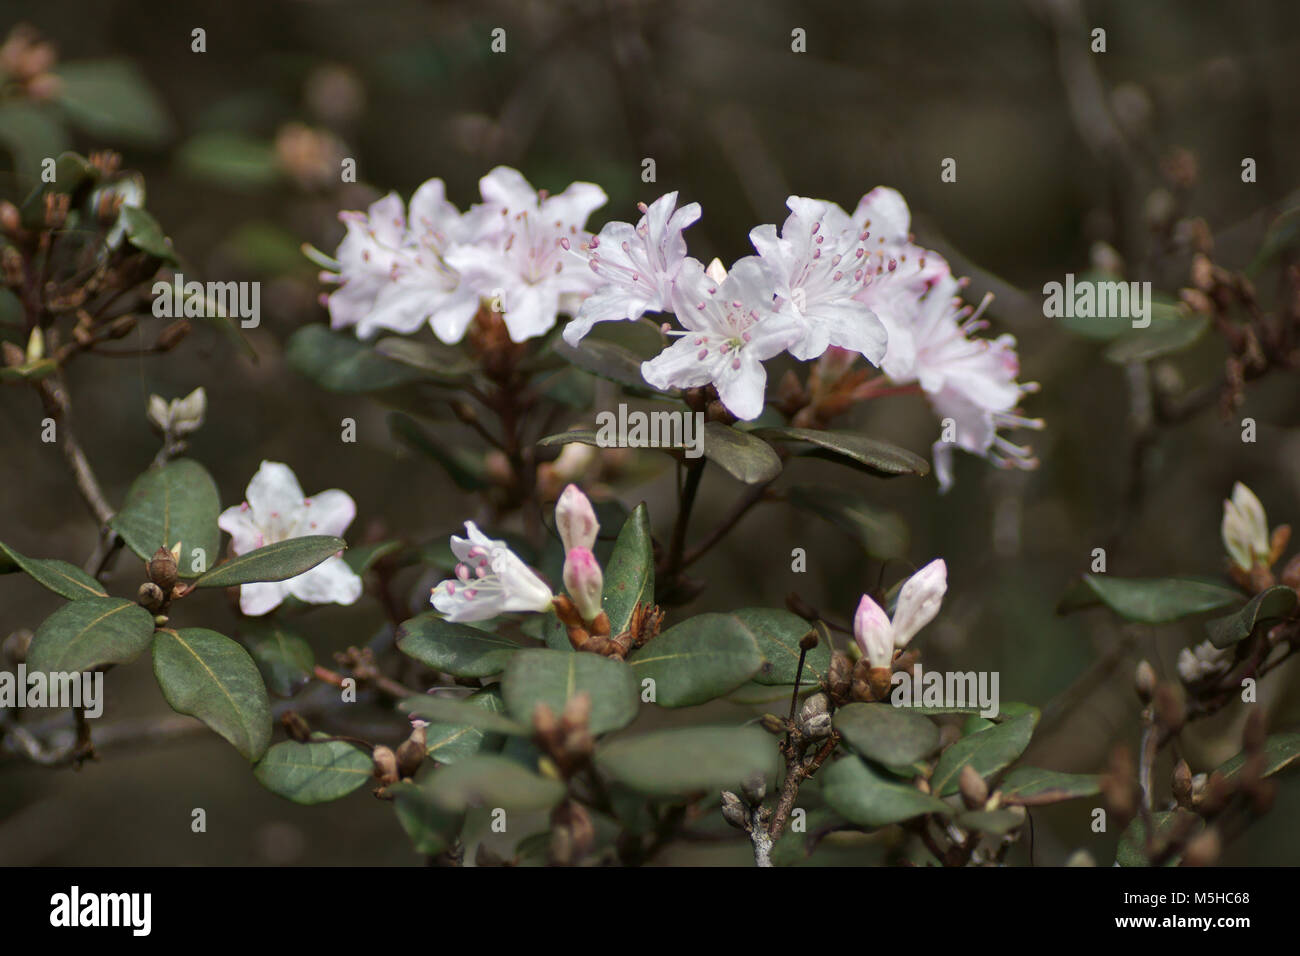 Rhododendron at Clyne gardens, Swansea, Wales, UK. Stock Photo